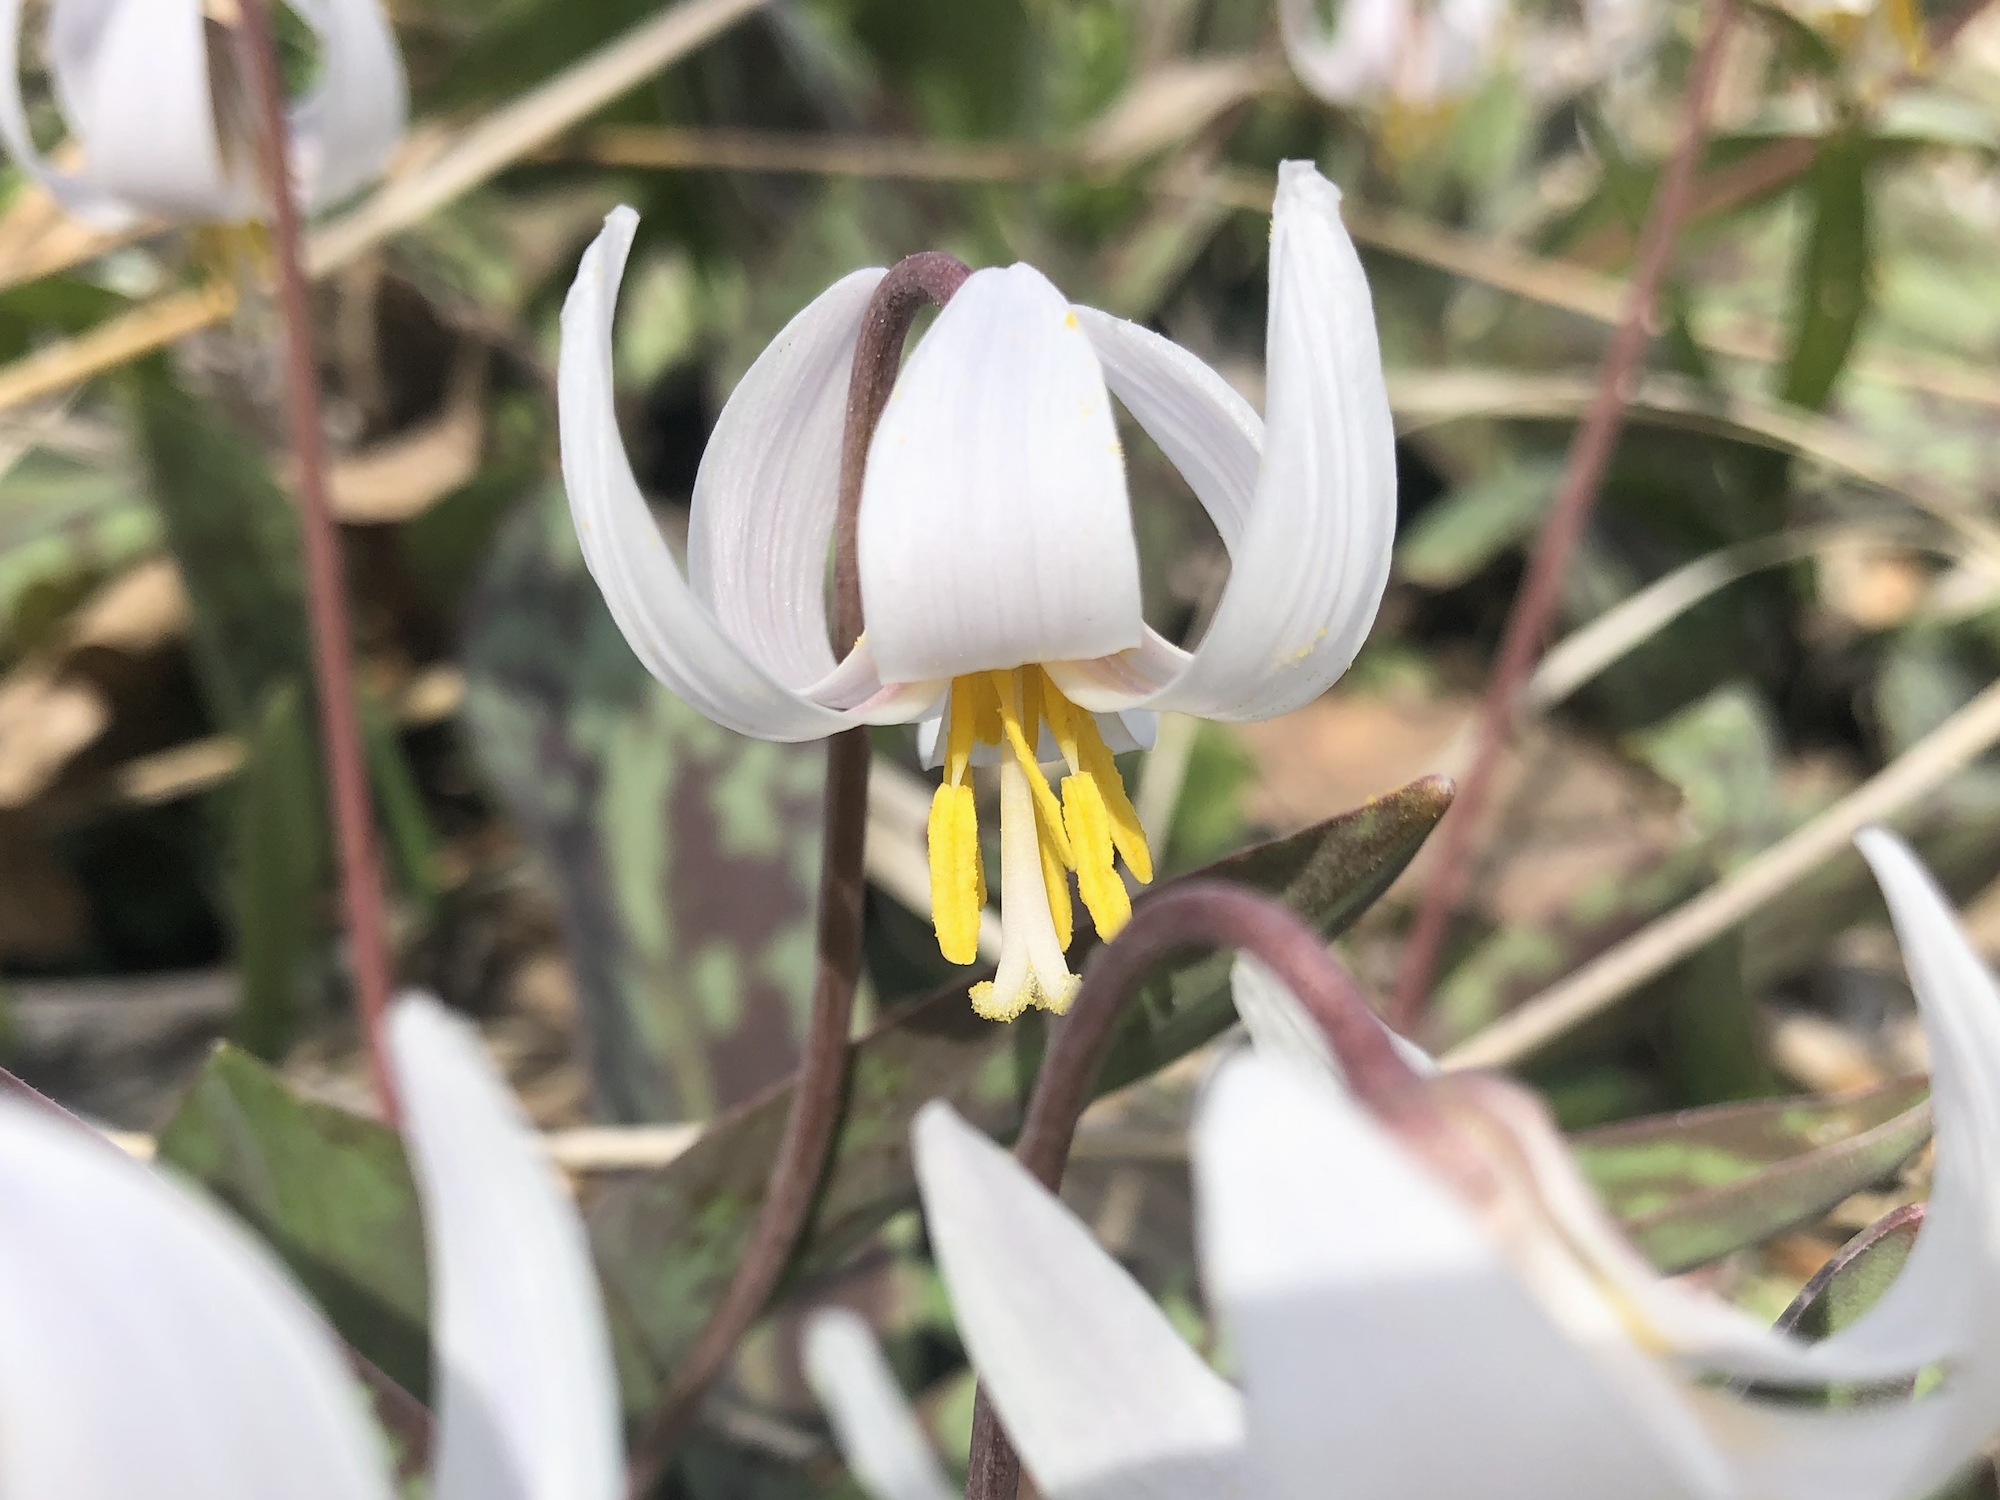 Trout Lily in Oak Savanna by Council Ring in Madison, Wisconsin on April 20, 2020.